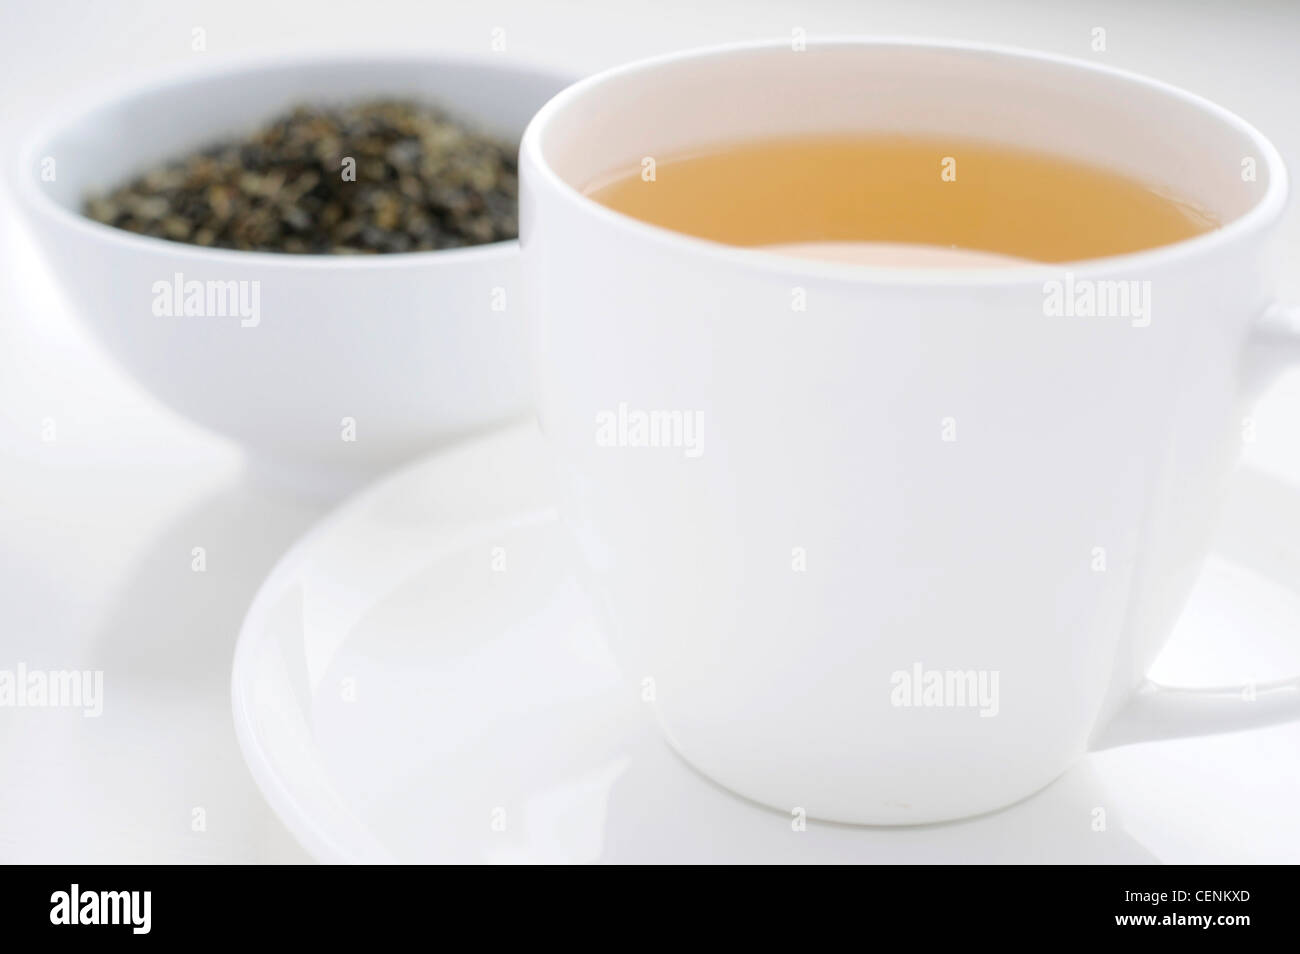 A close up of a white cup and saucer filled with a yellow fruit tea, with a bowl of loose tea in the background Stock Photo